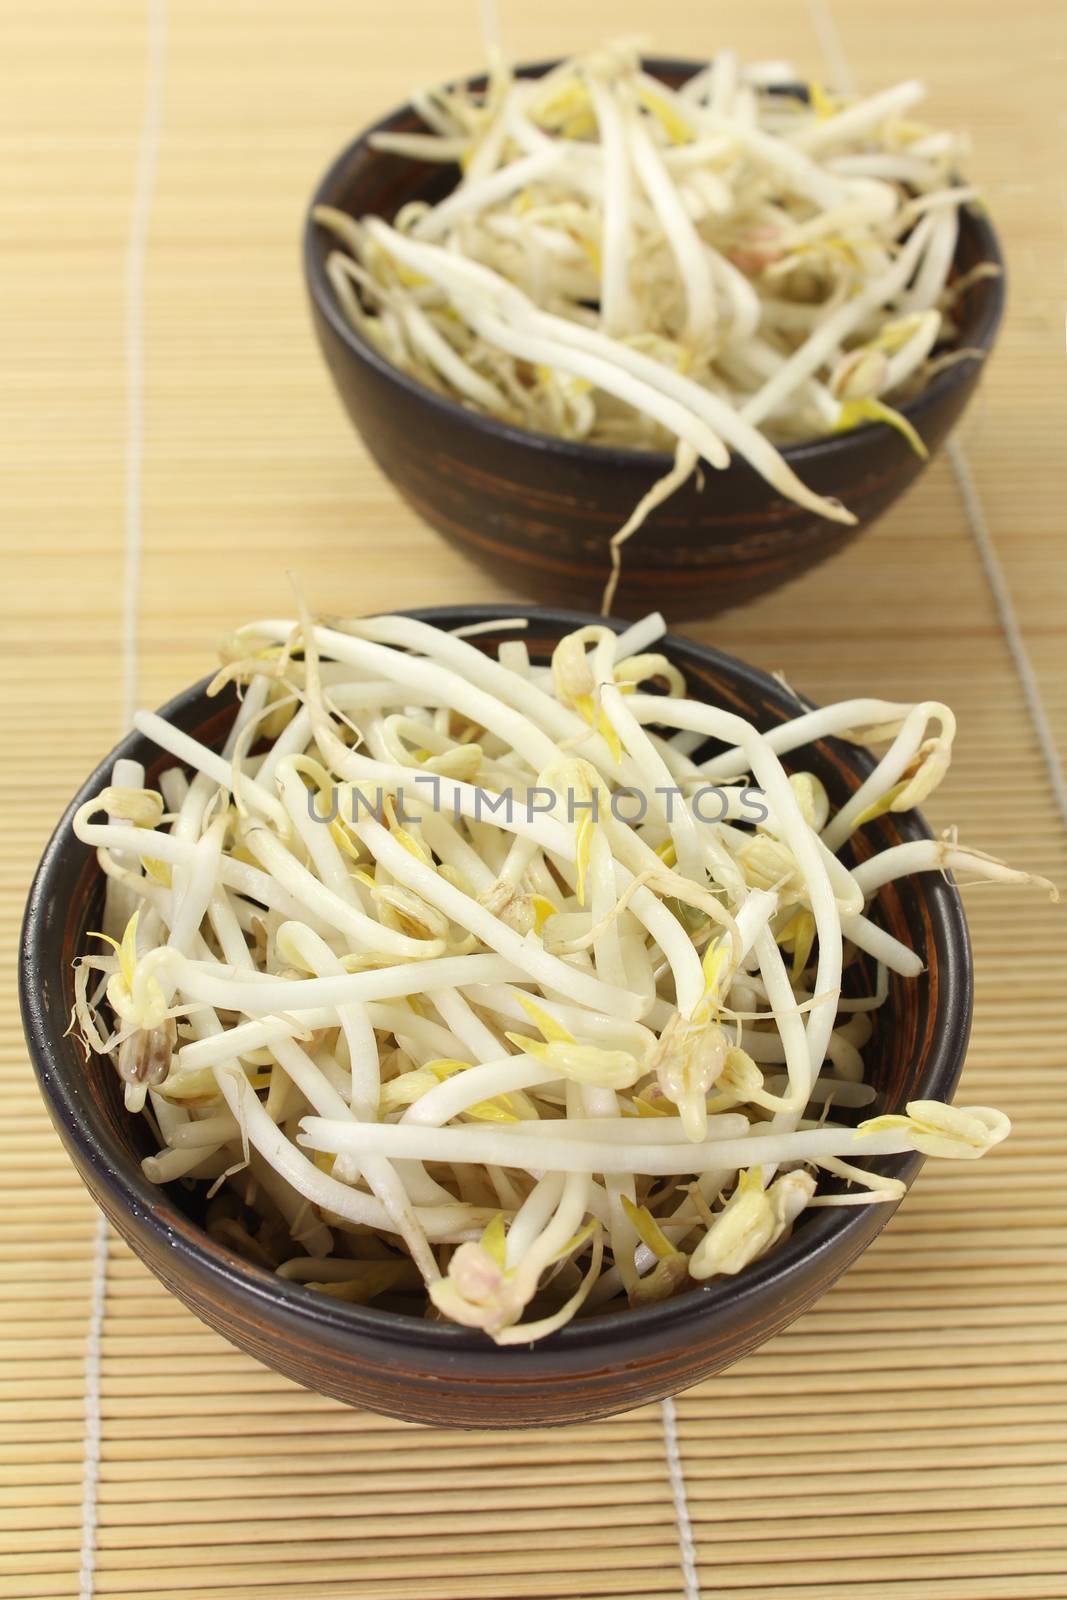 Mung bean sprouts by silencefoto